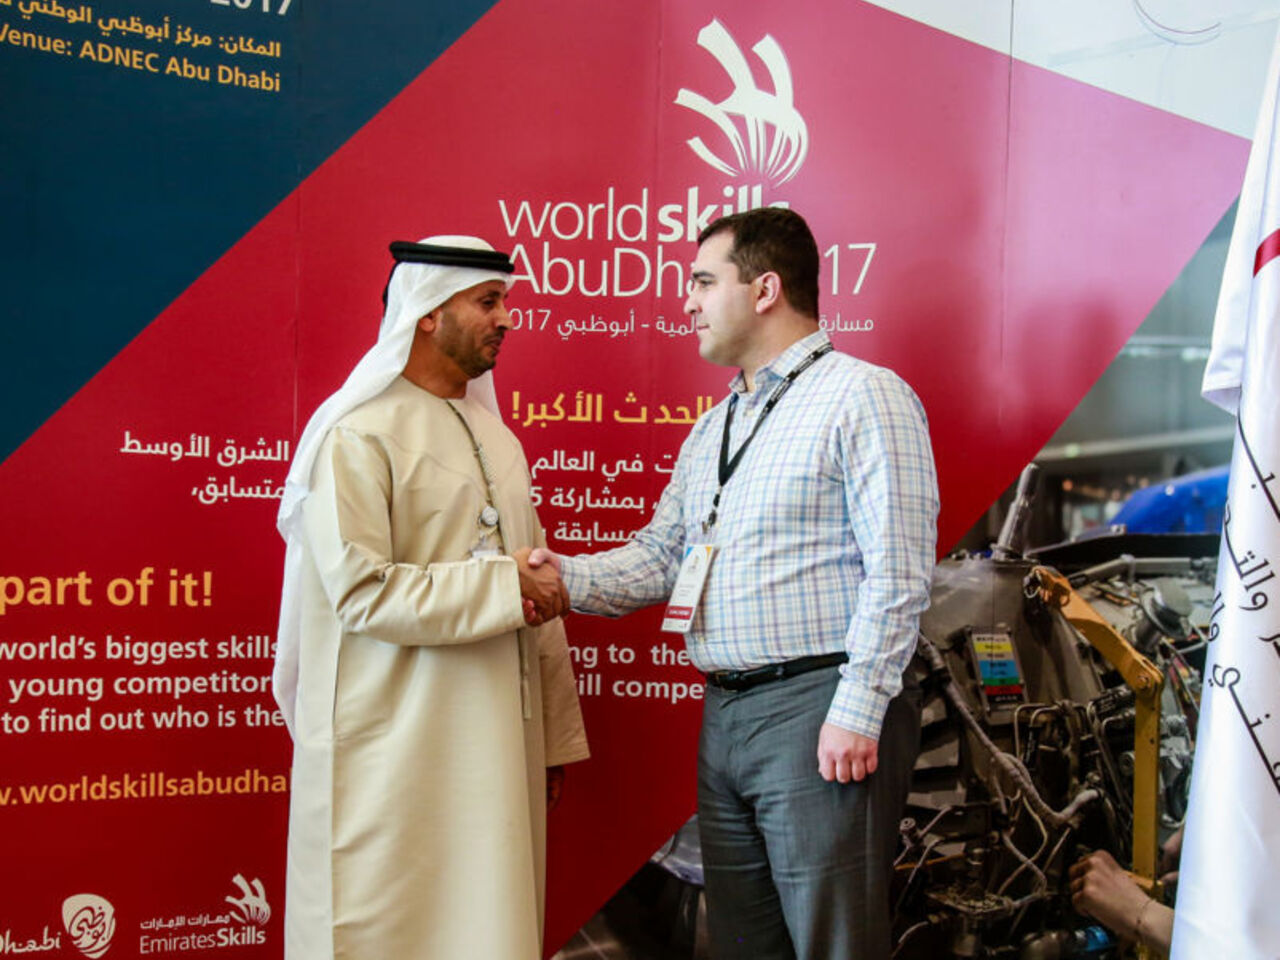 VEX Robotics expands partnership with WorldSkills to bring additional STEM solutions to more students internationally